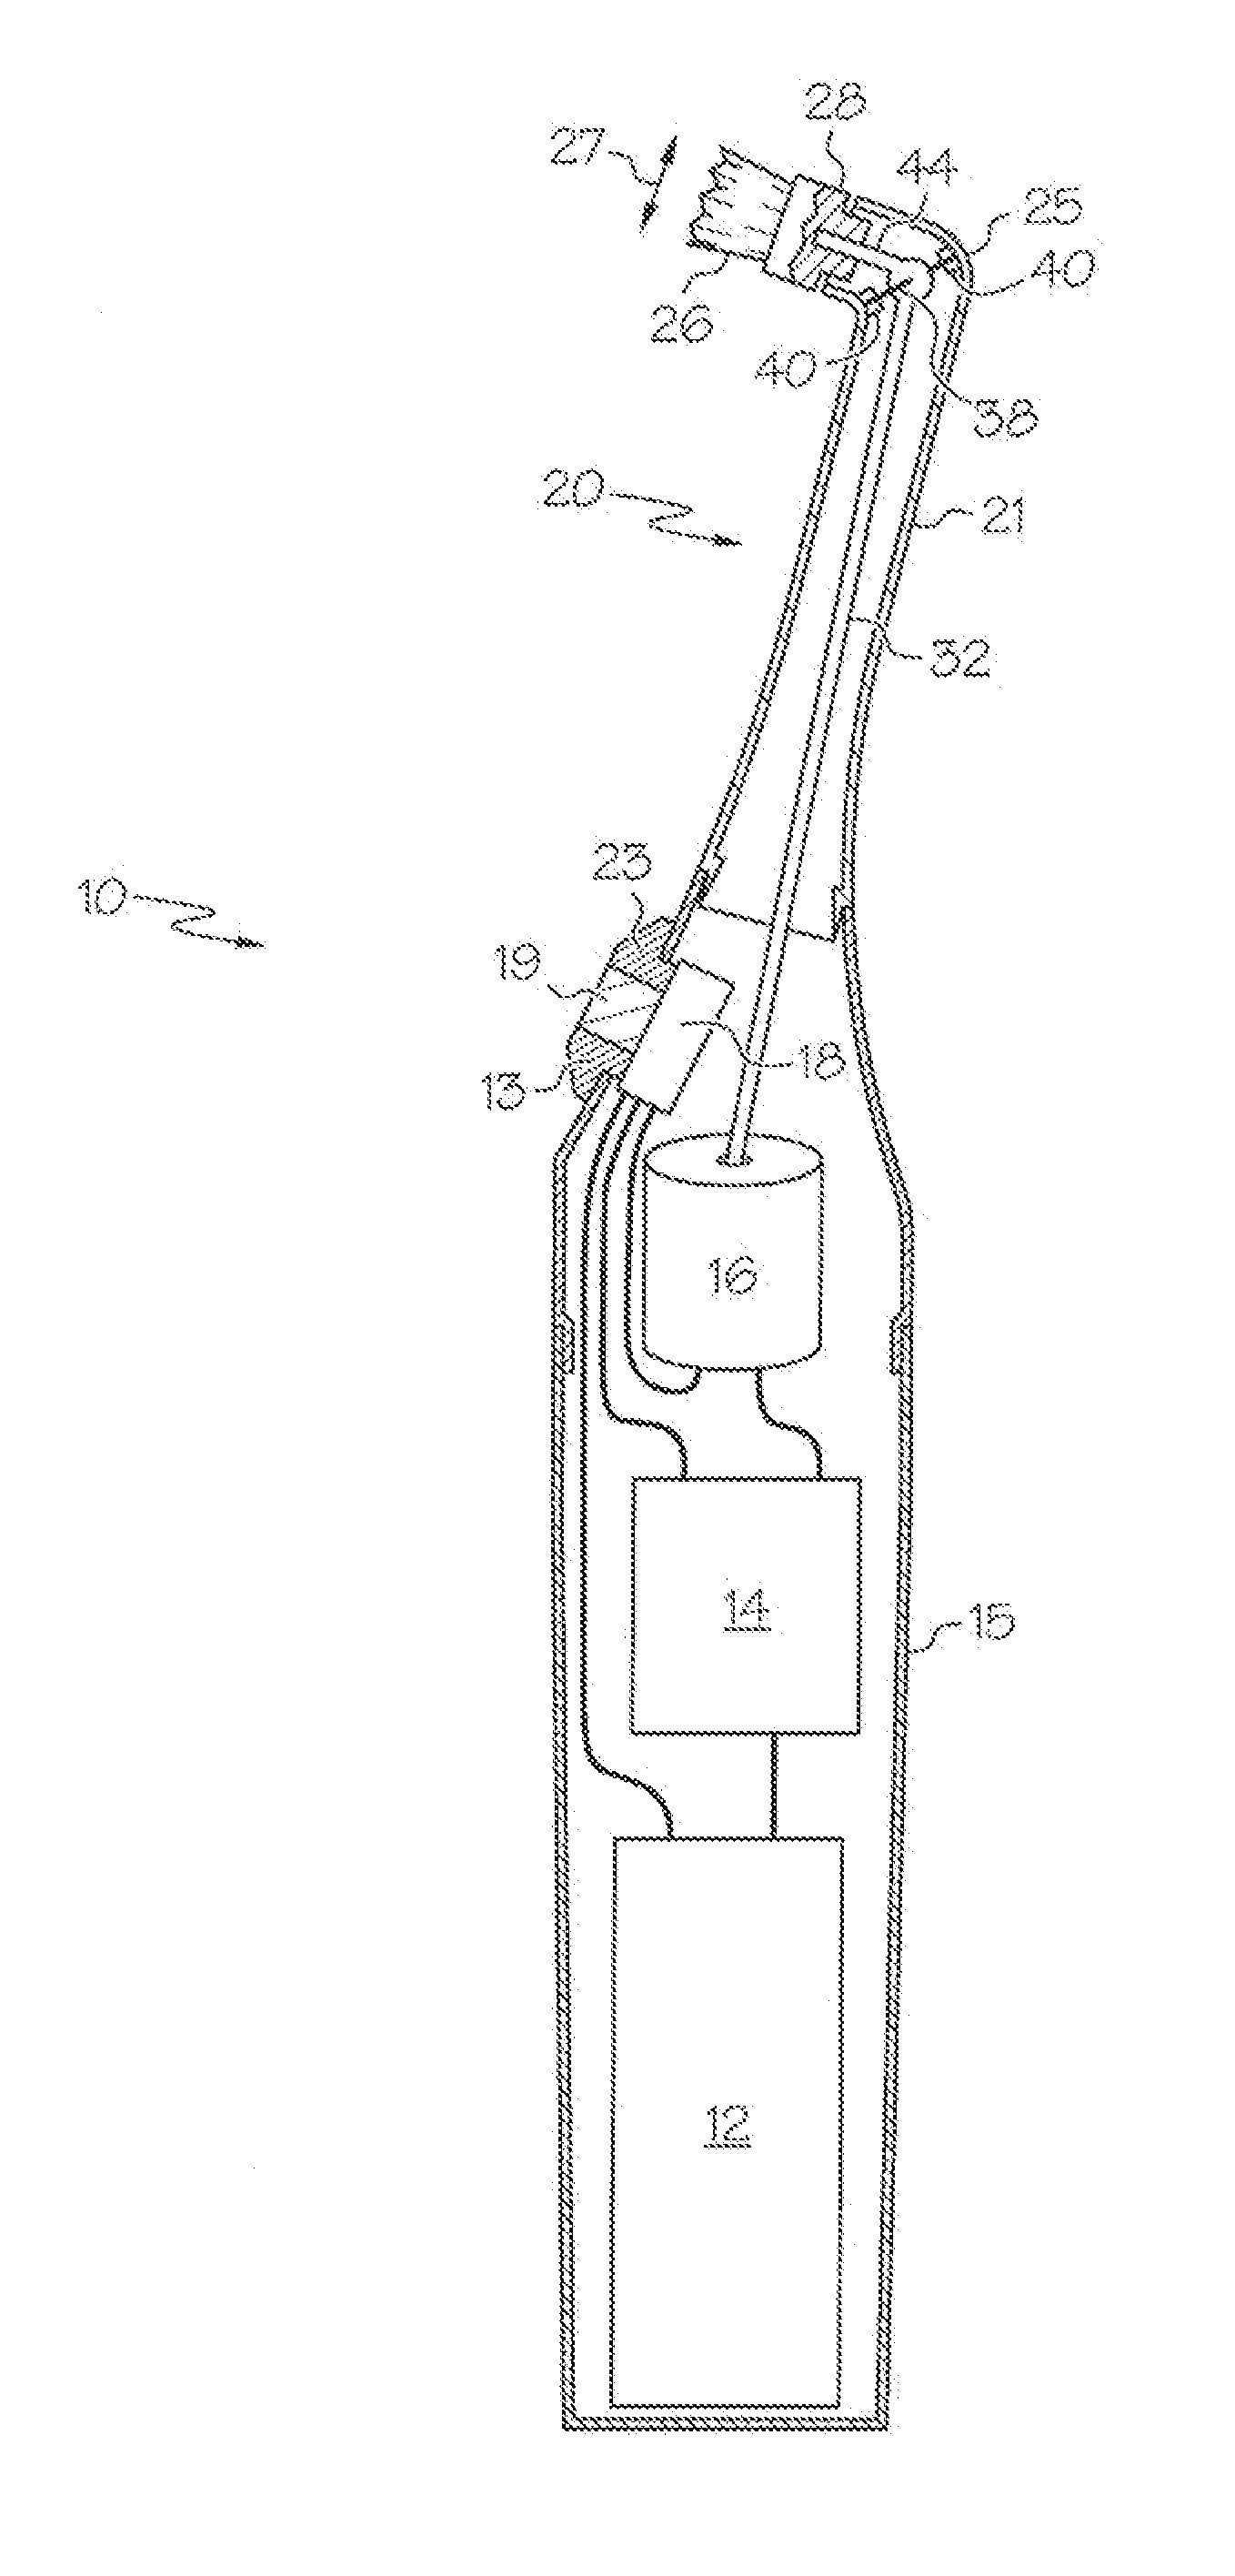 Ophthalmic treatment apparatus